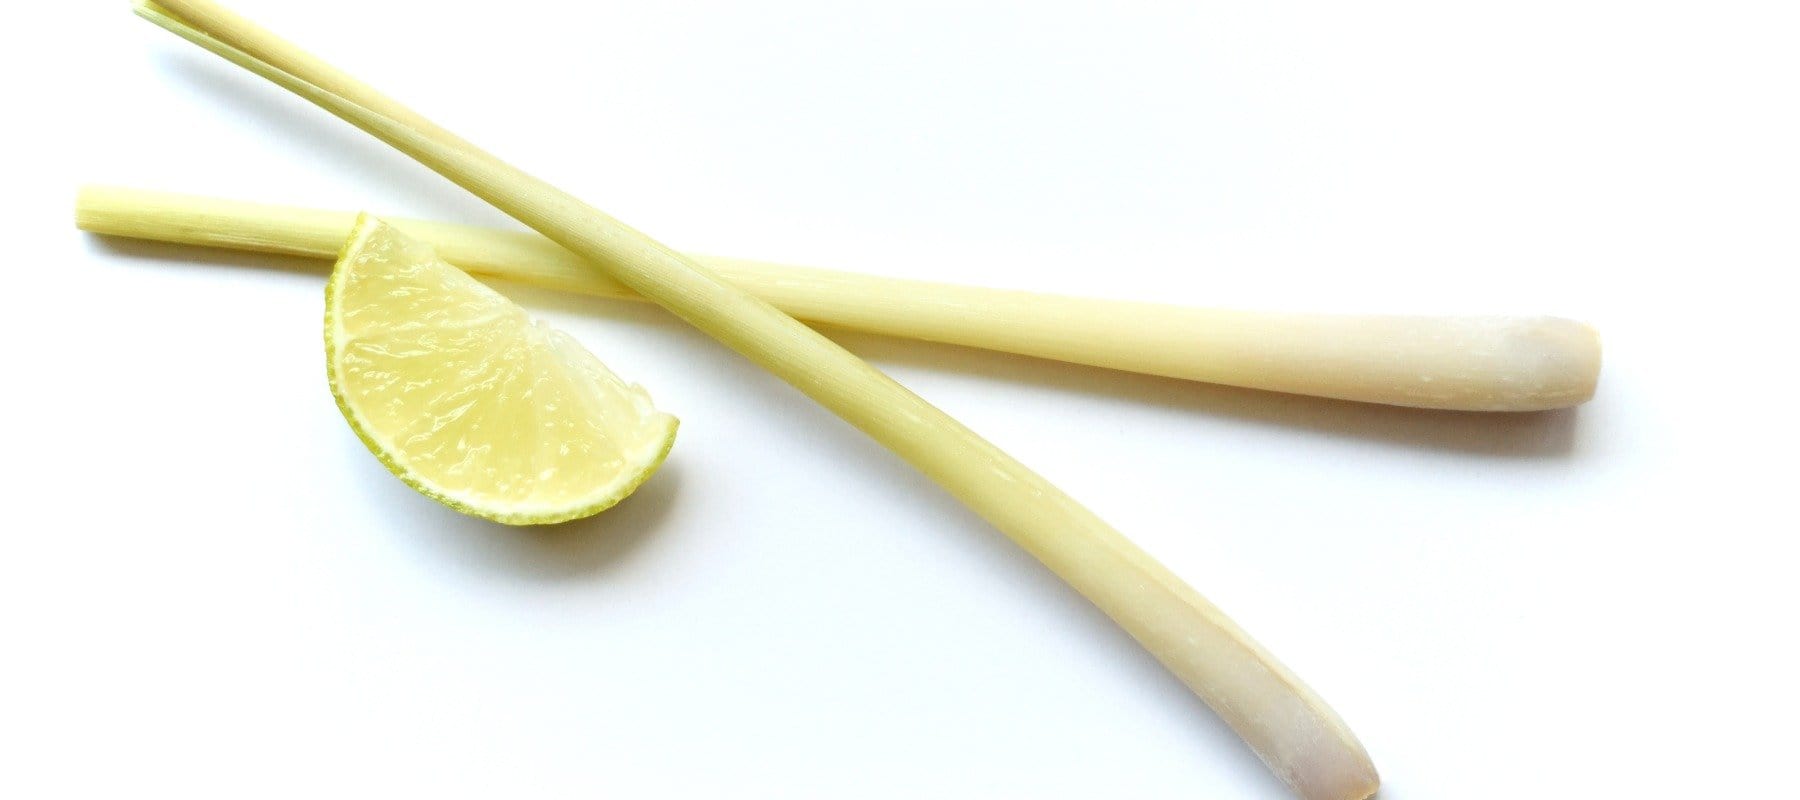 8 Lemongrass Essential Oil Benefits: Fight Inflammation, Microbes & More!